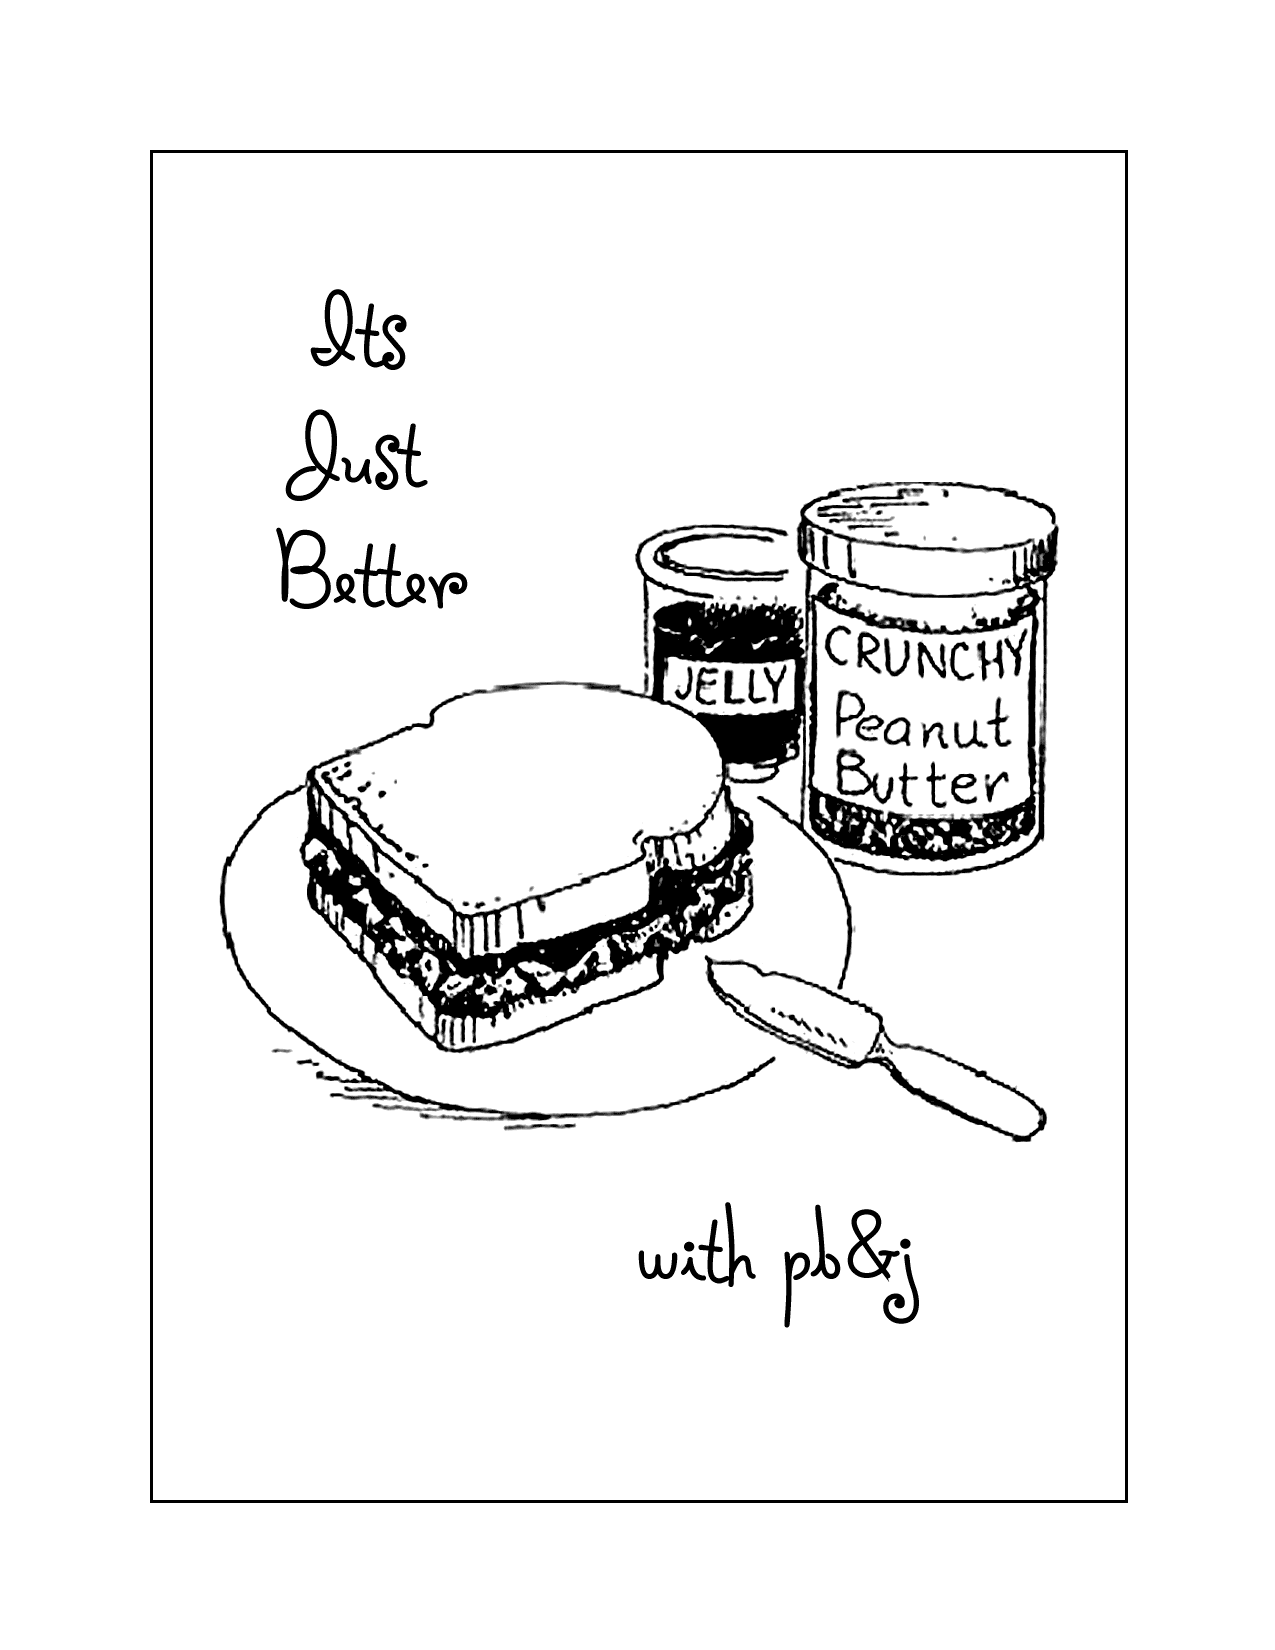 Peanut Butter And Jelly Sandwich Coloring Page